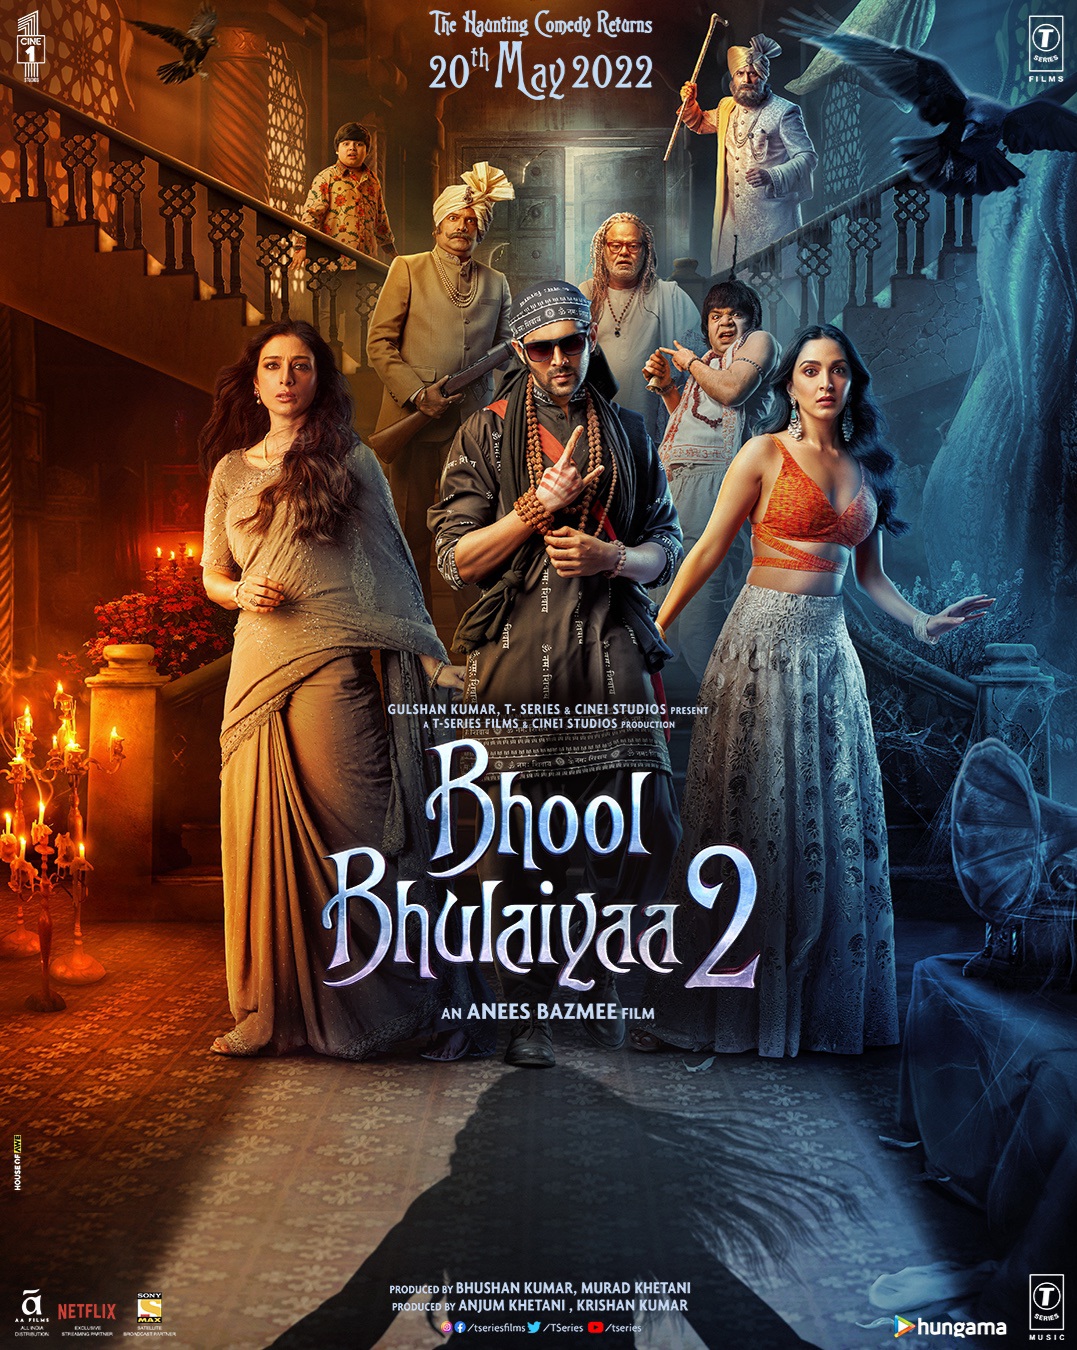 Bhool Bhulaiyaa 2 Movie (2022) Cast & Crew, Release Date, Story, Review, Poster, Trailer, Budget, Collection 